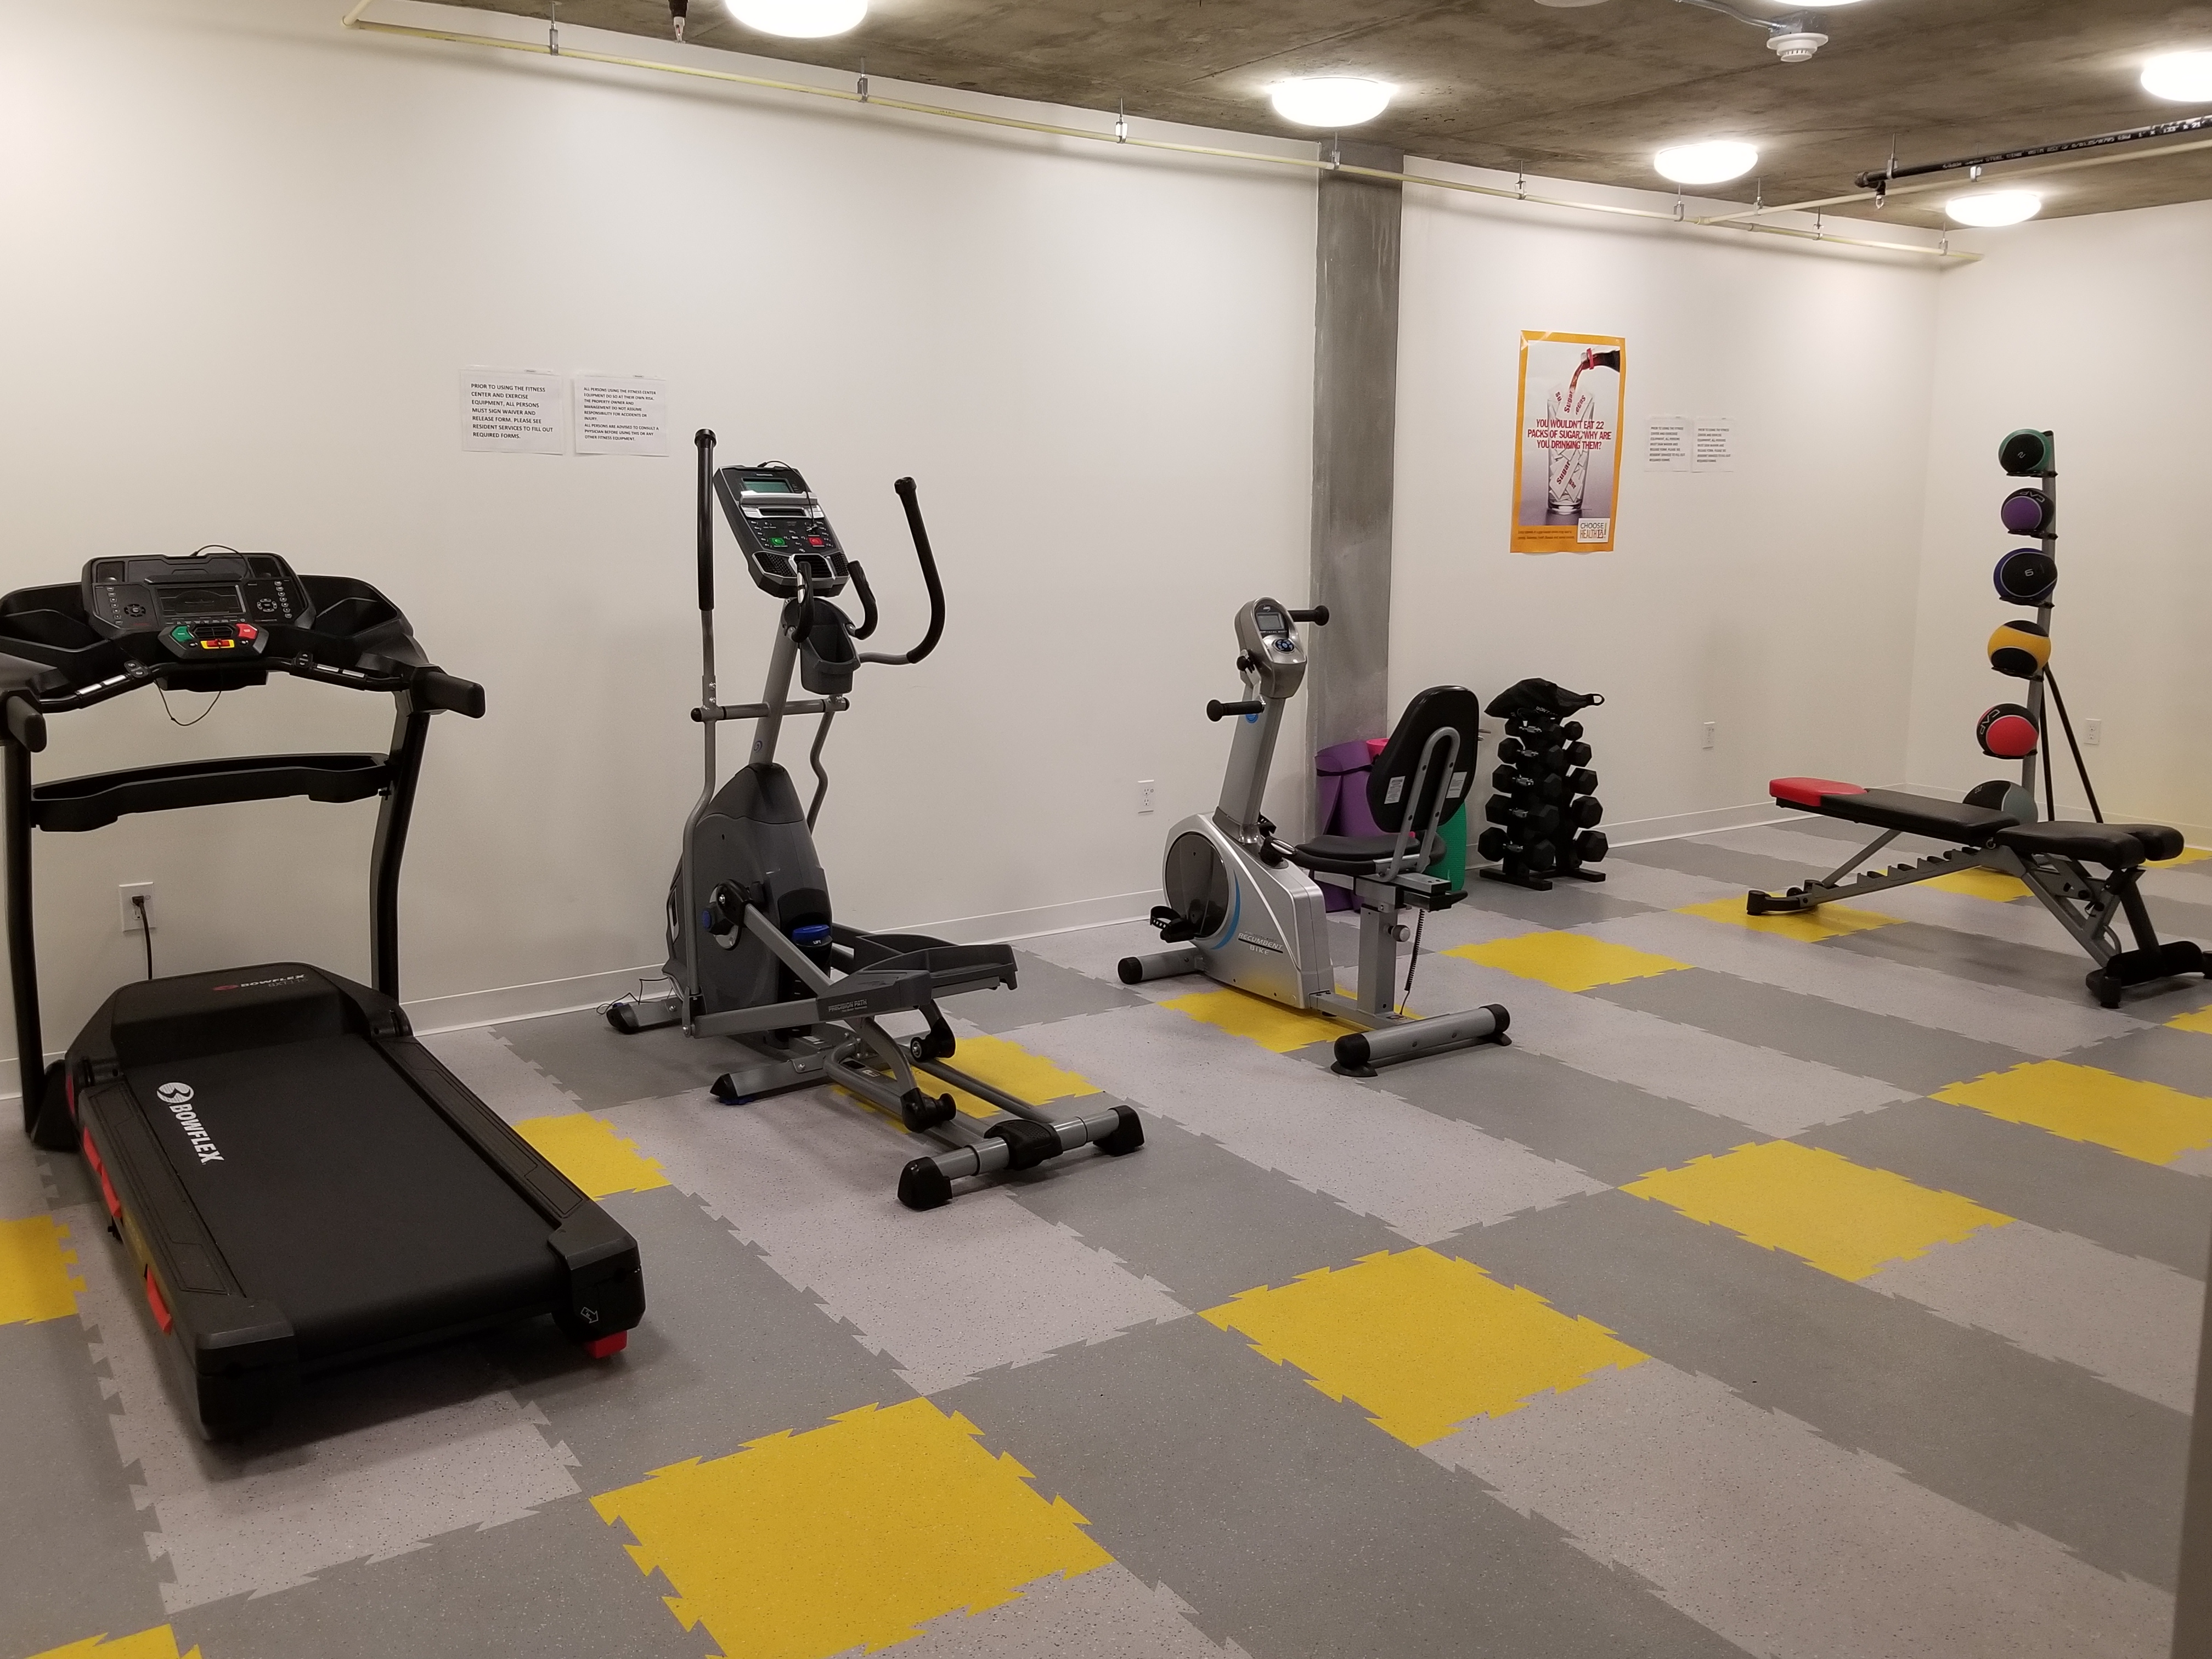 Fitness room that consists of a treadmill, stationary bikes, elliptical machine, a flat becnh and weights.